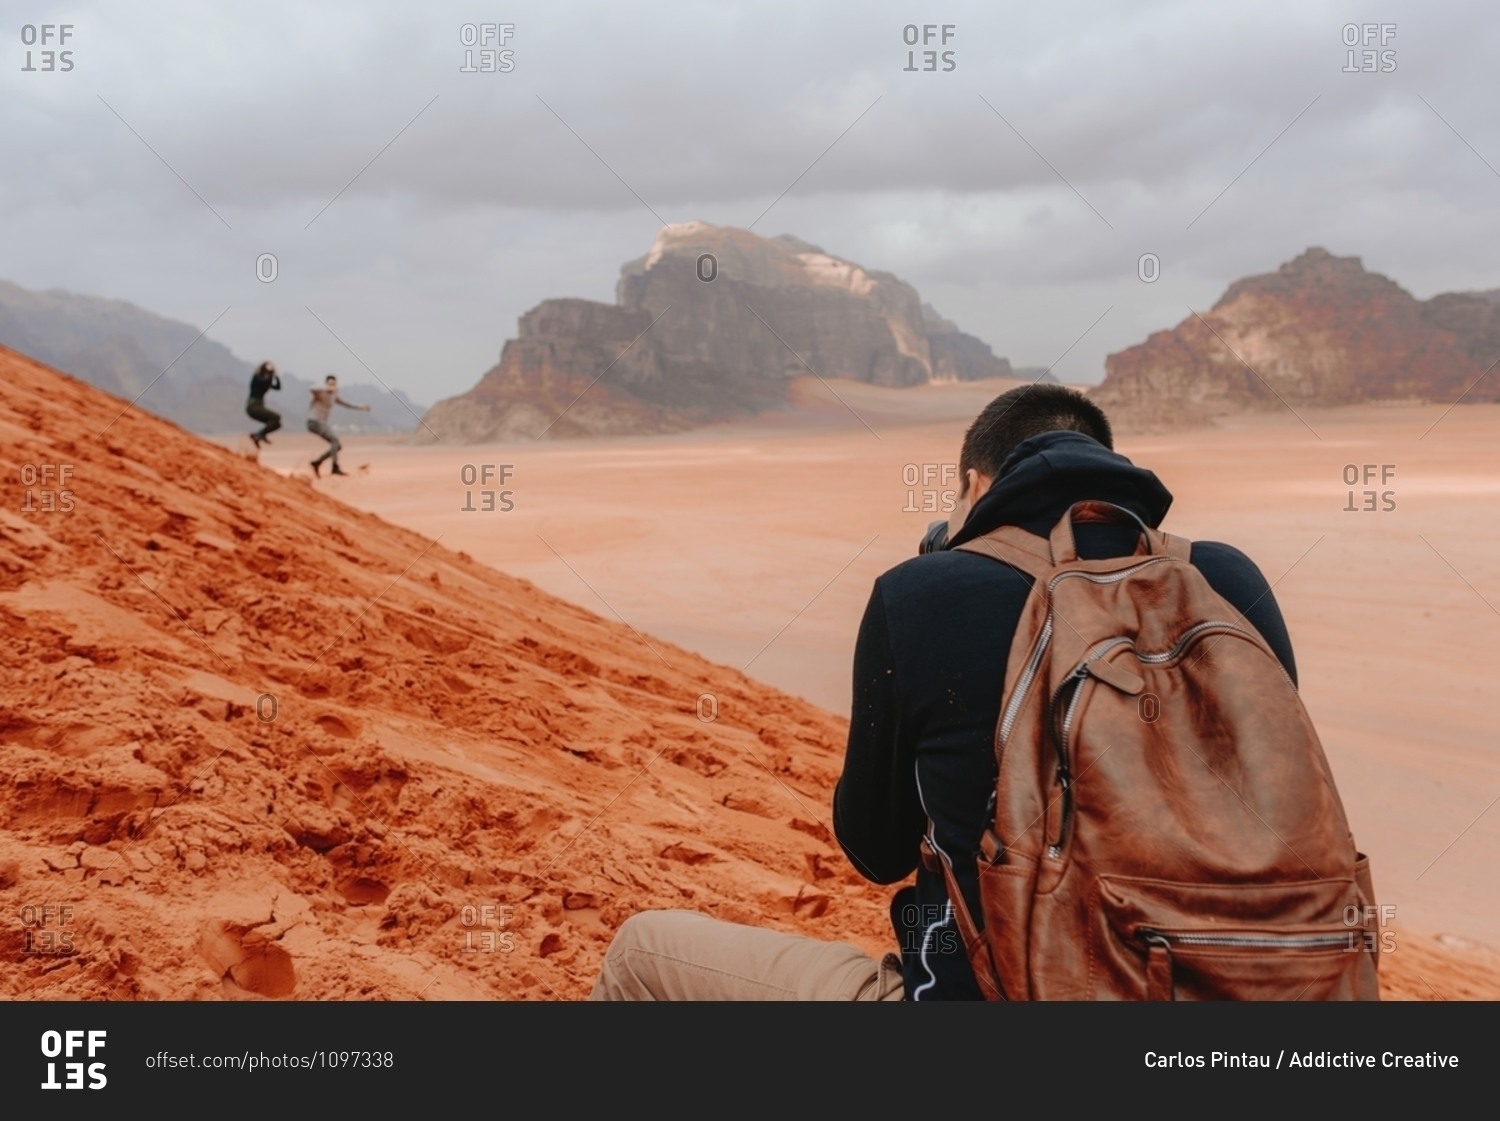 Back view of male traveling photographer taking pictures of people running down sandy hill in Wadi Rum sandstone valley during vacation in Jordan